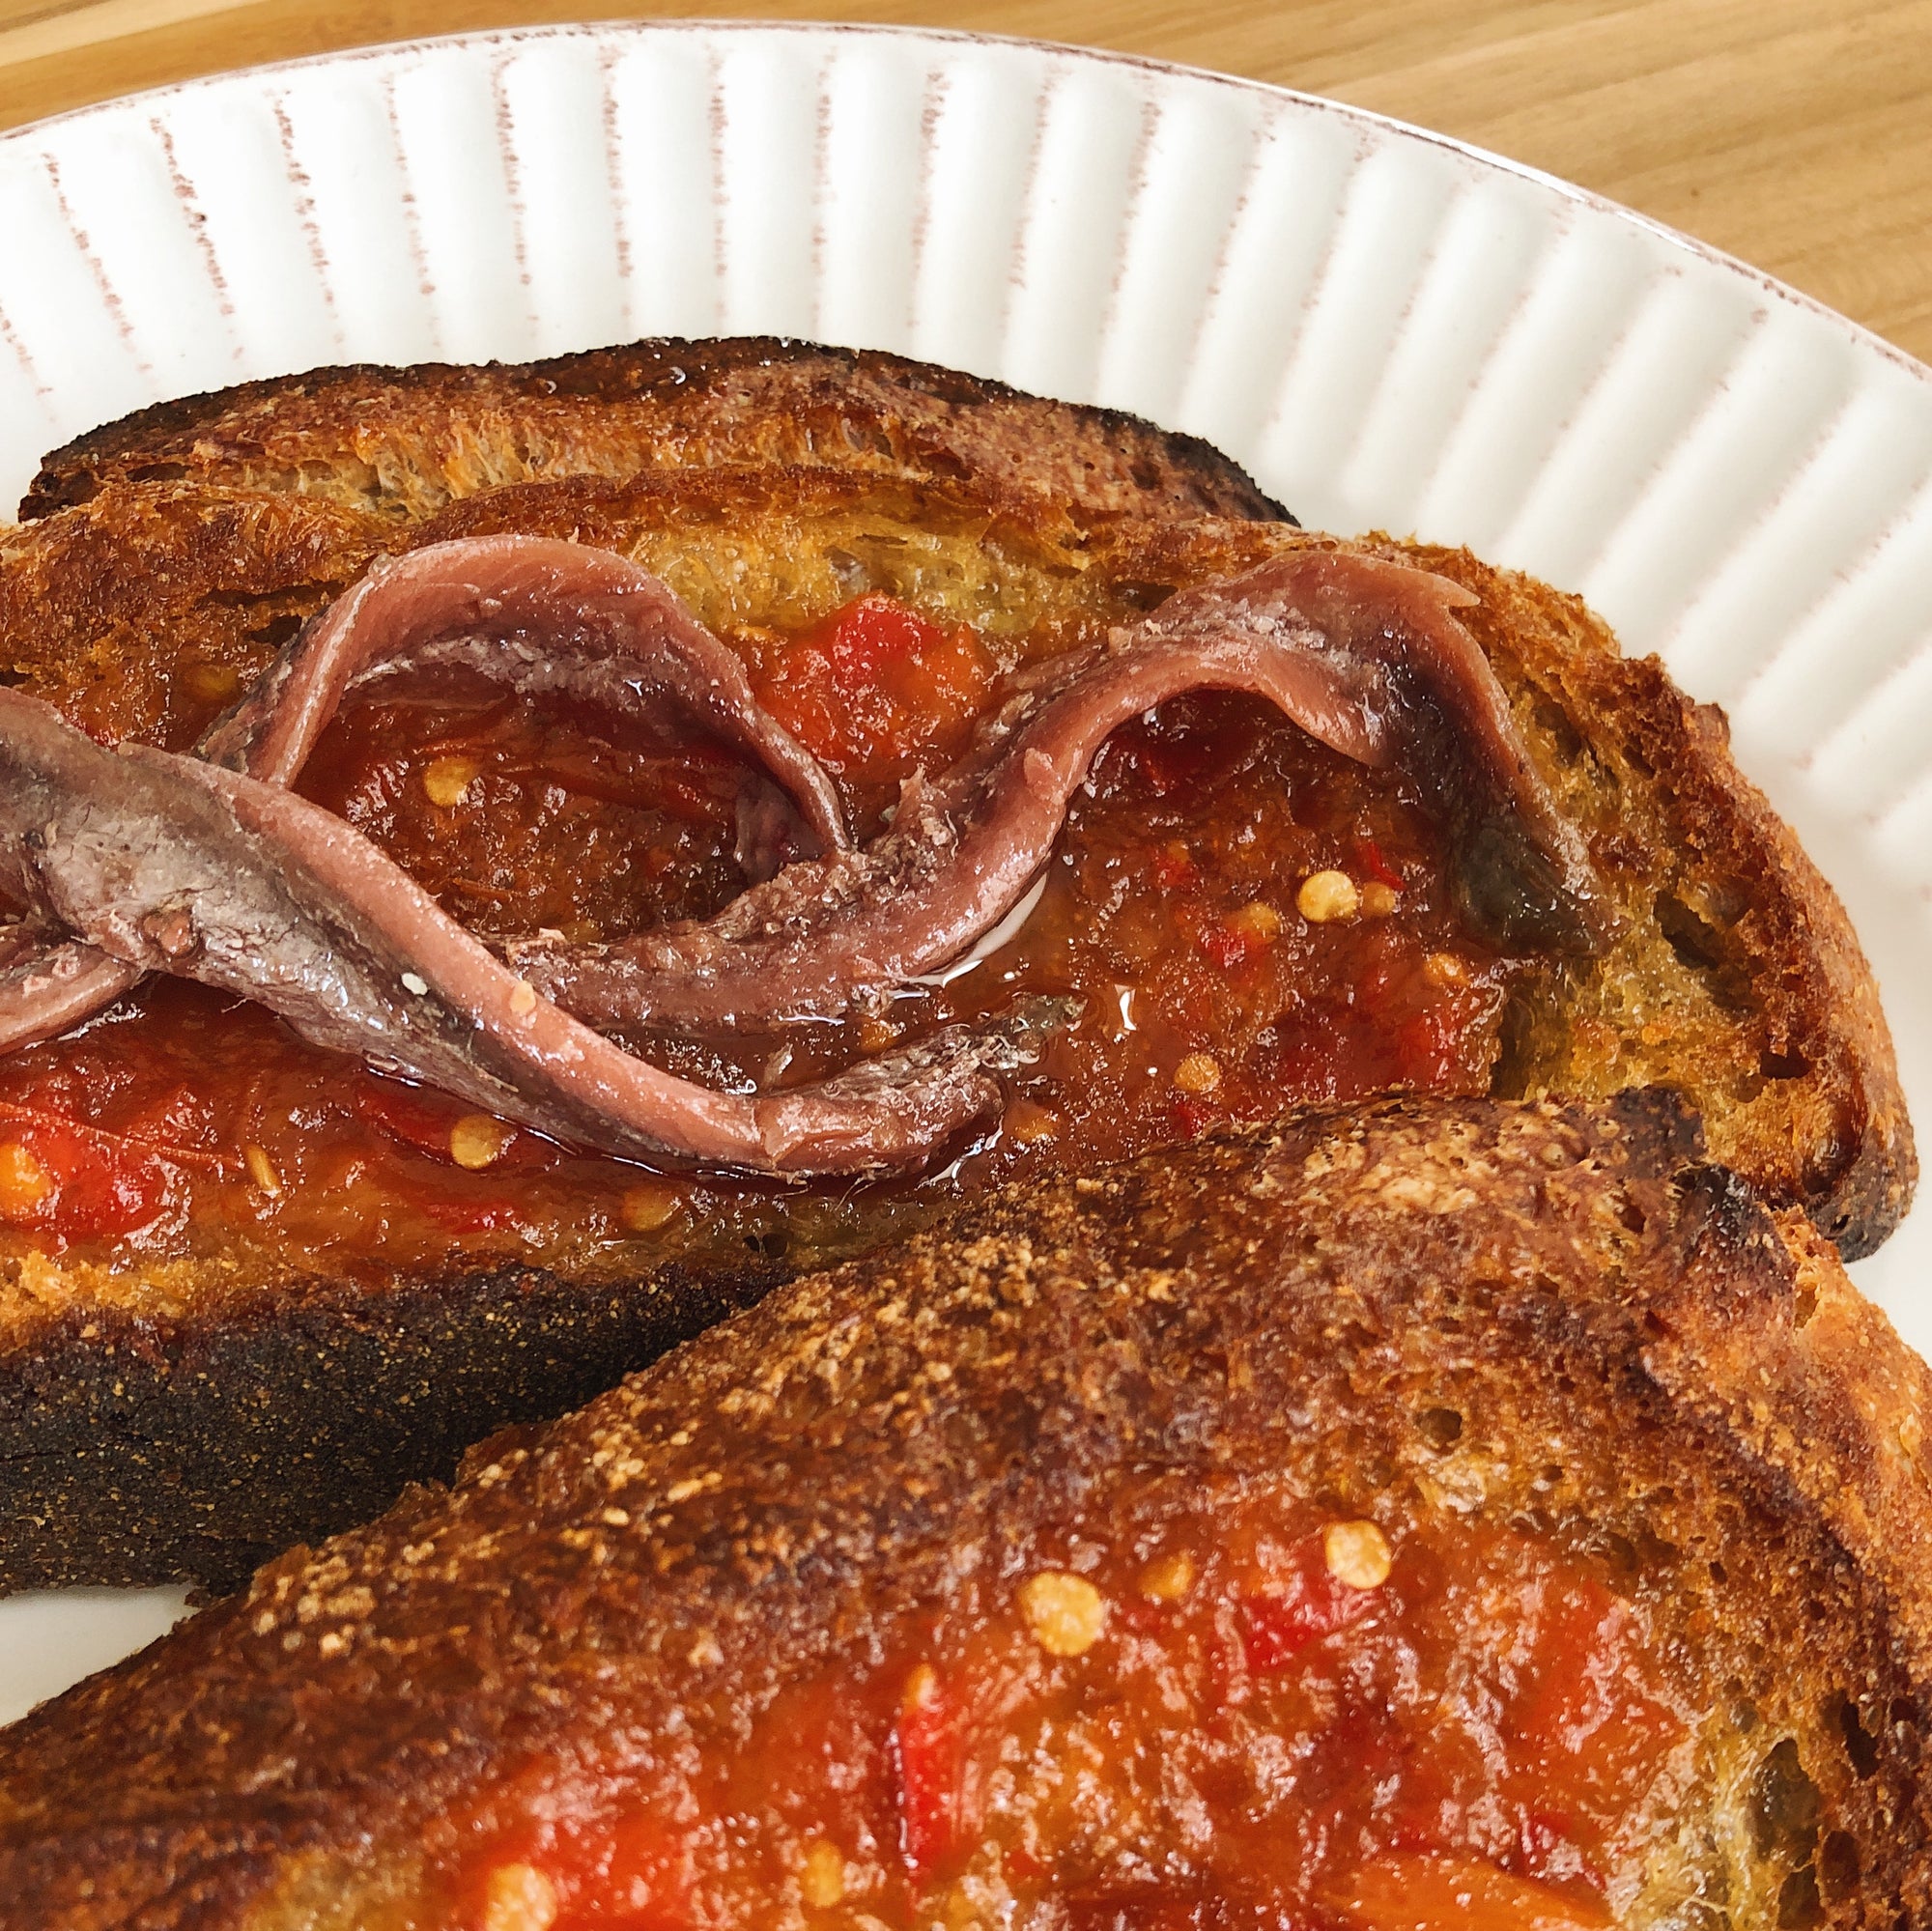 Pan con tomate with a twist - Cantabrian anchovies - tomato preserve - Donostia Foods